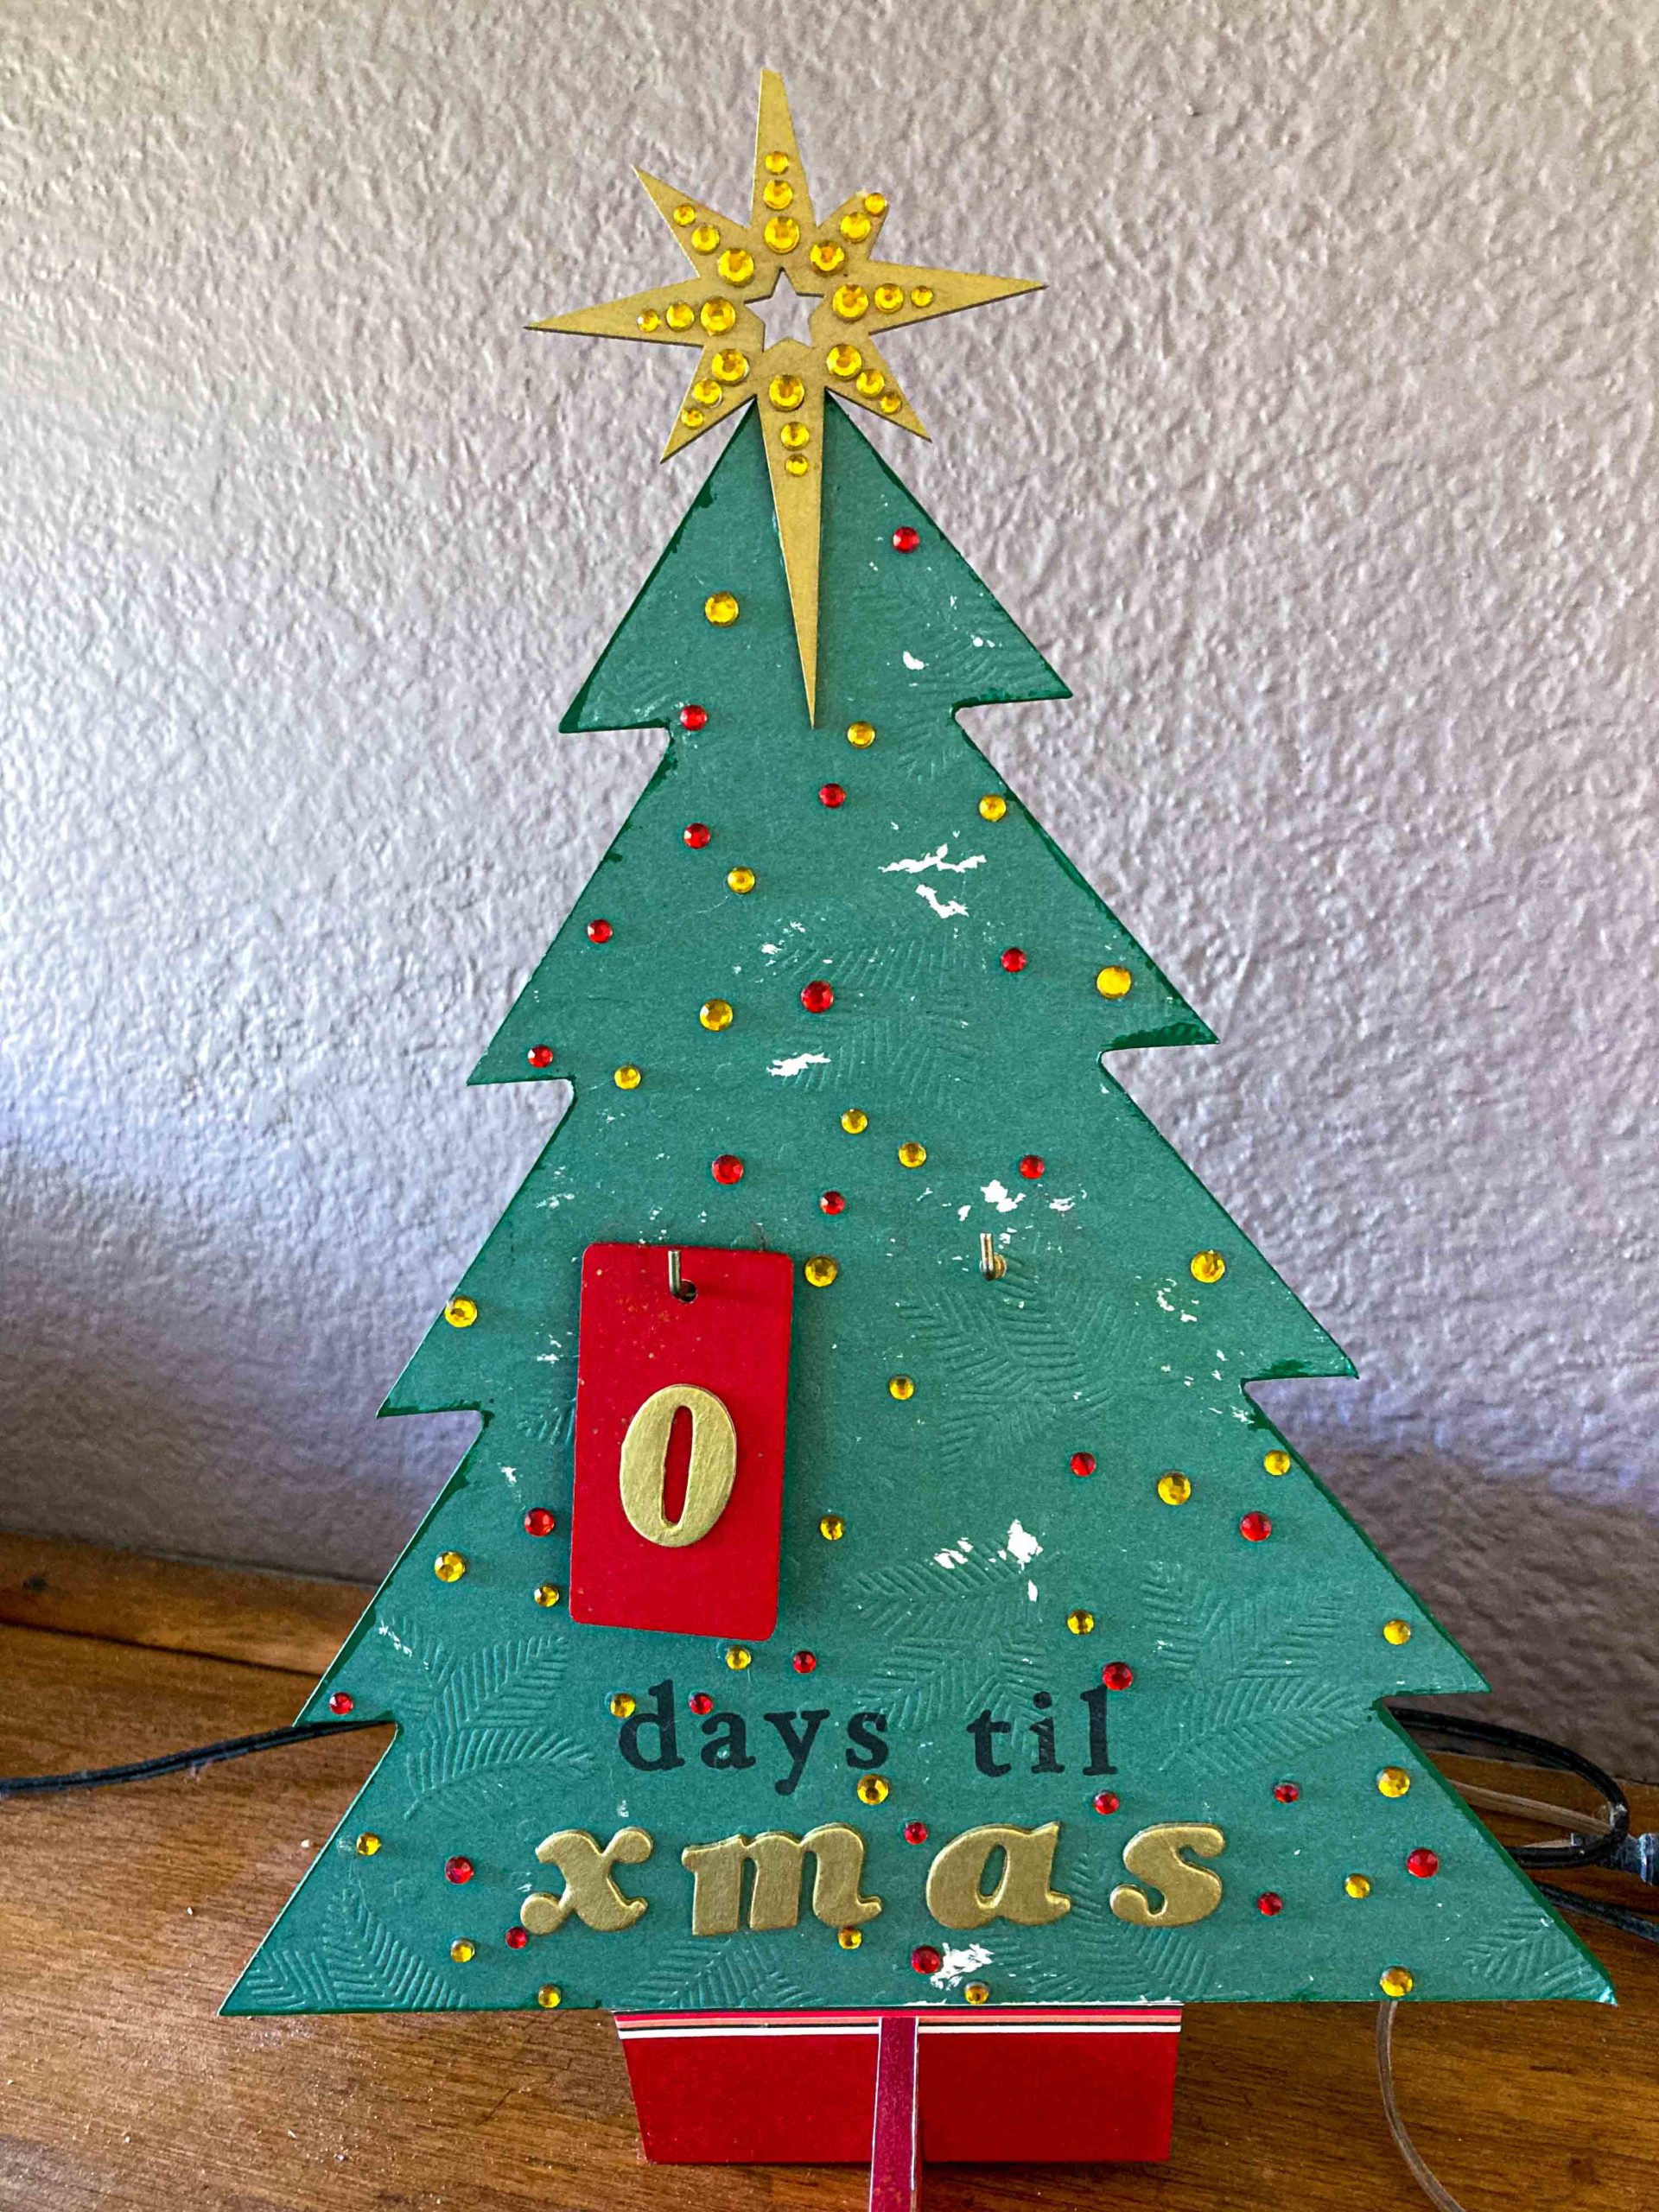 A battered wooden pine tree with a red 0 above the words 'days til xmas'. There is a broken gold wooden star on the top of the tree